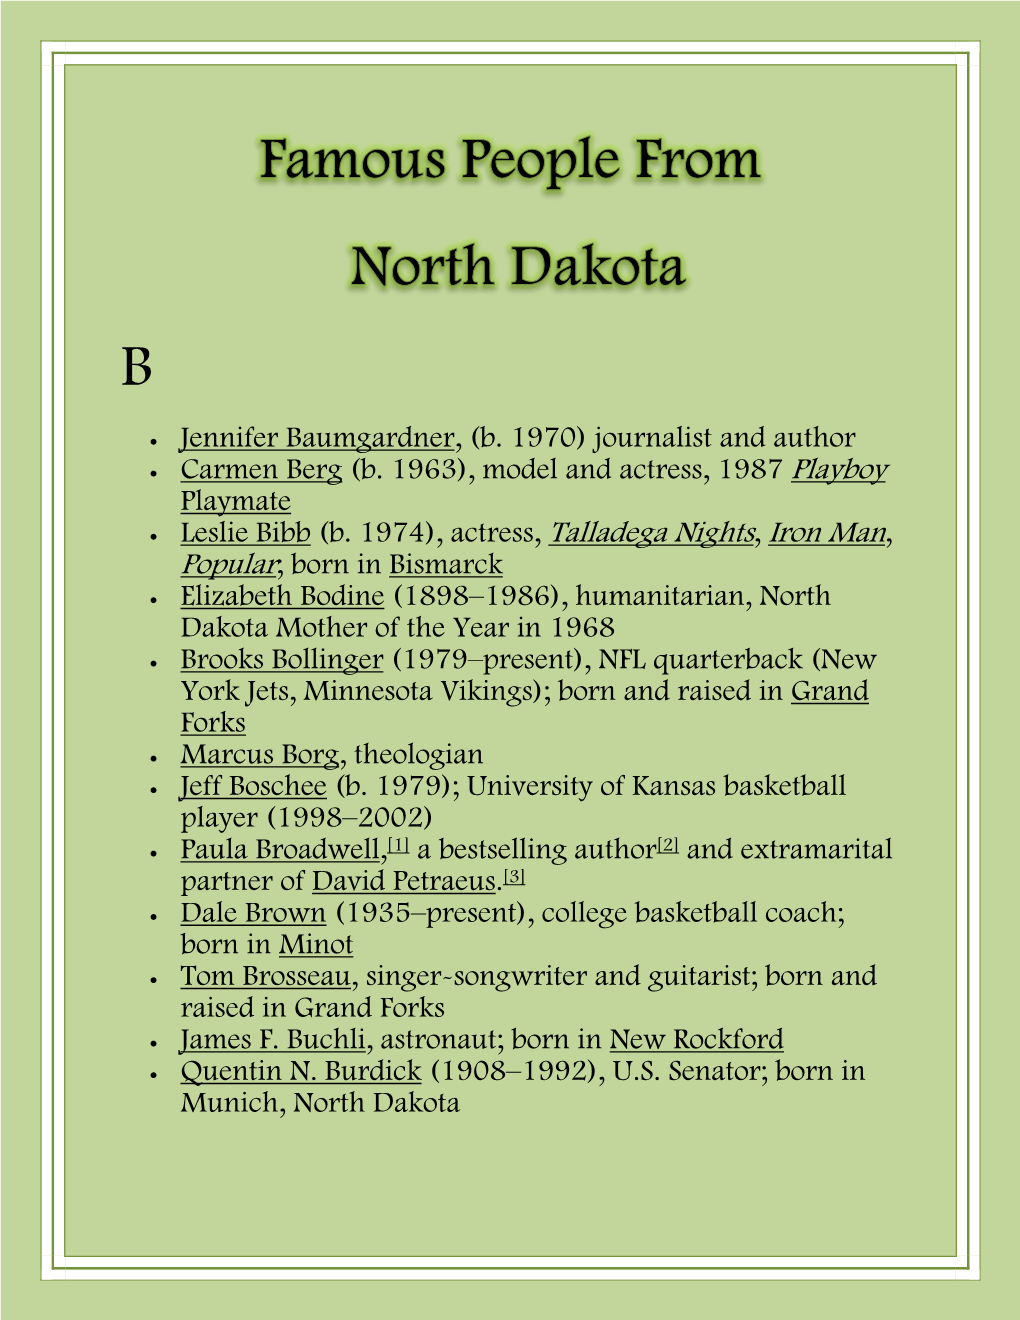 Famous People from North Dakota